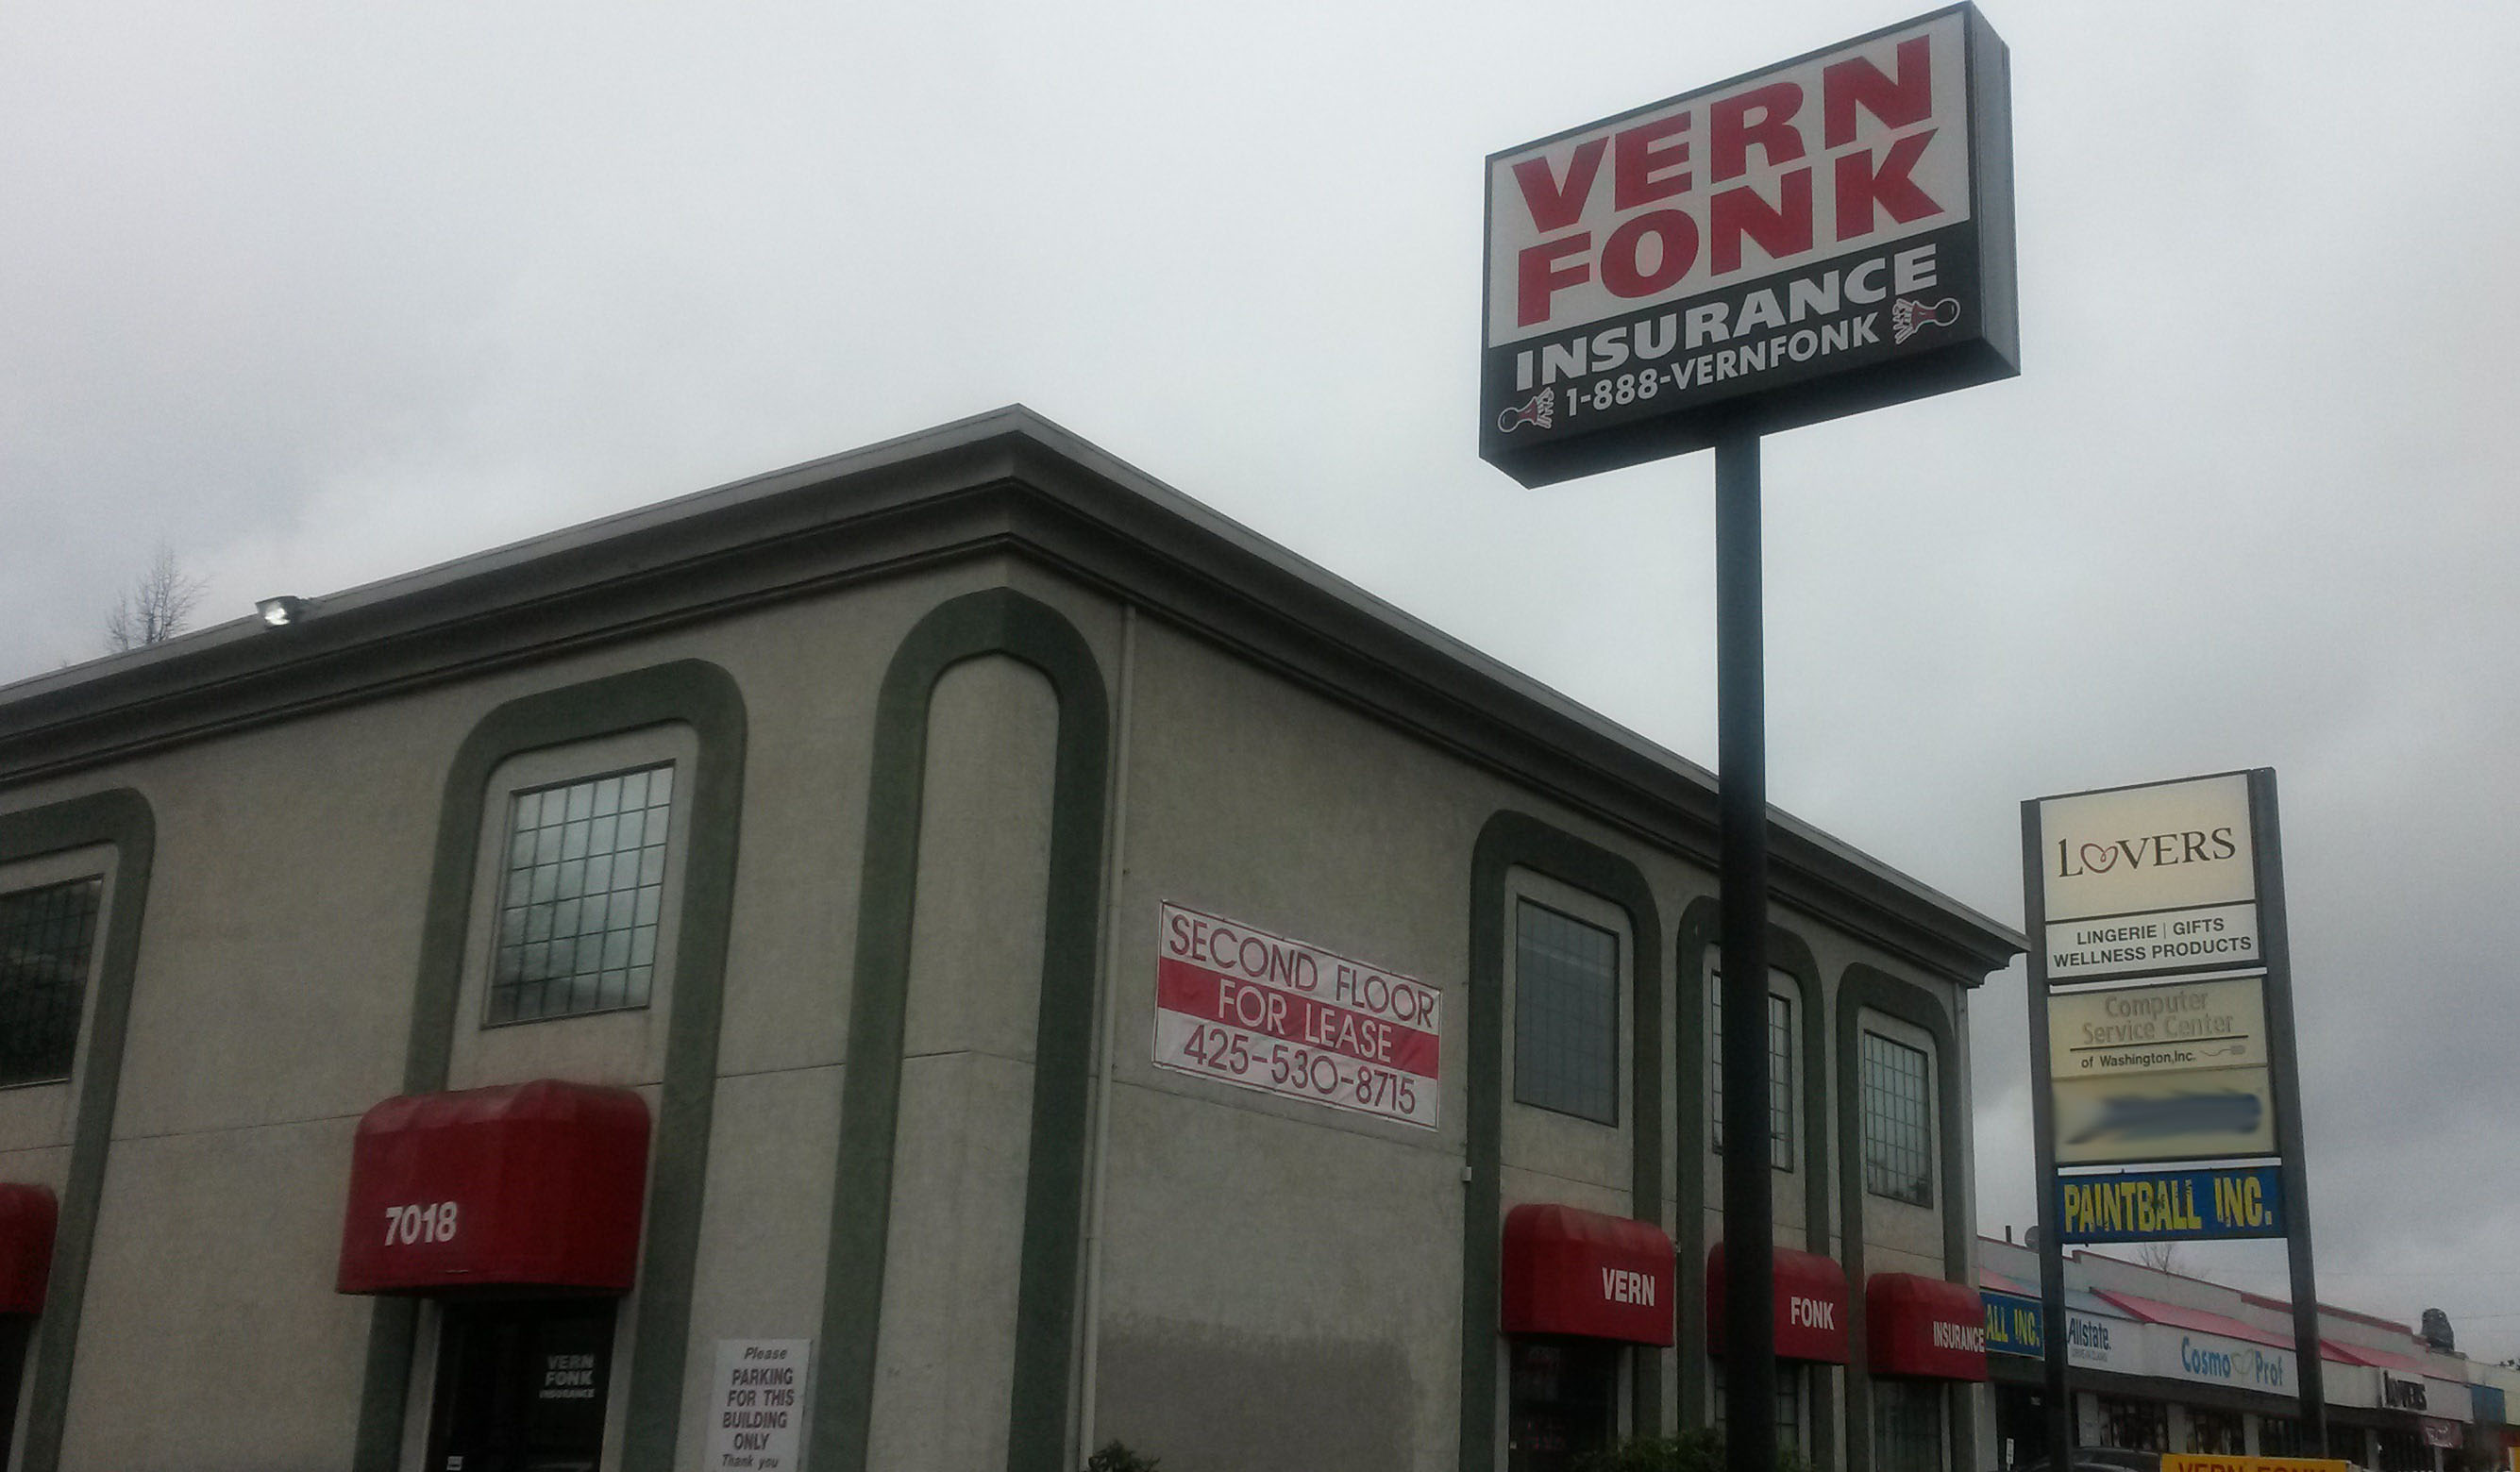 Vern Fonk Insurance - - Auto insurance Policy quotes